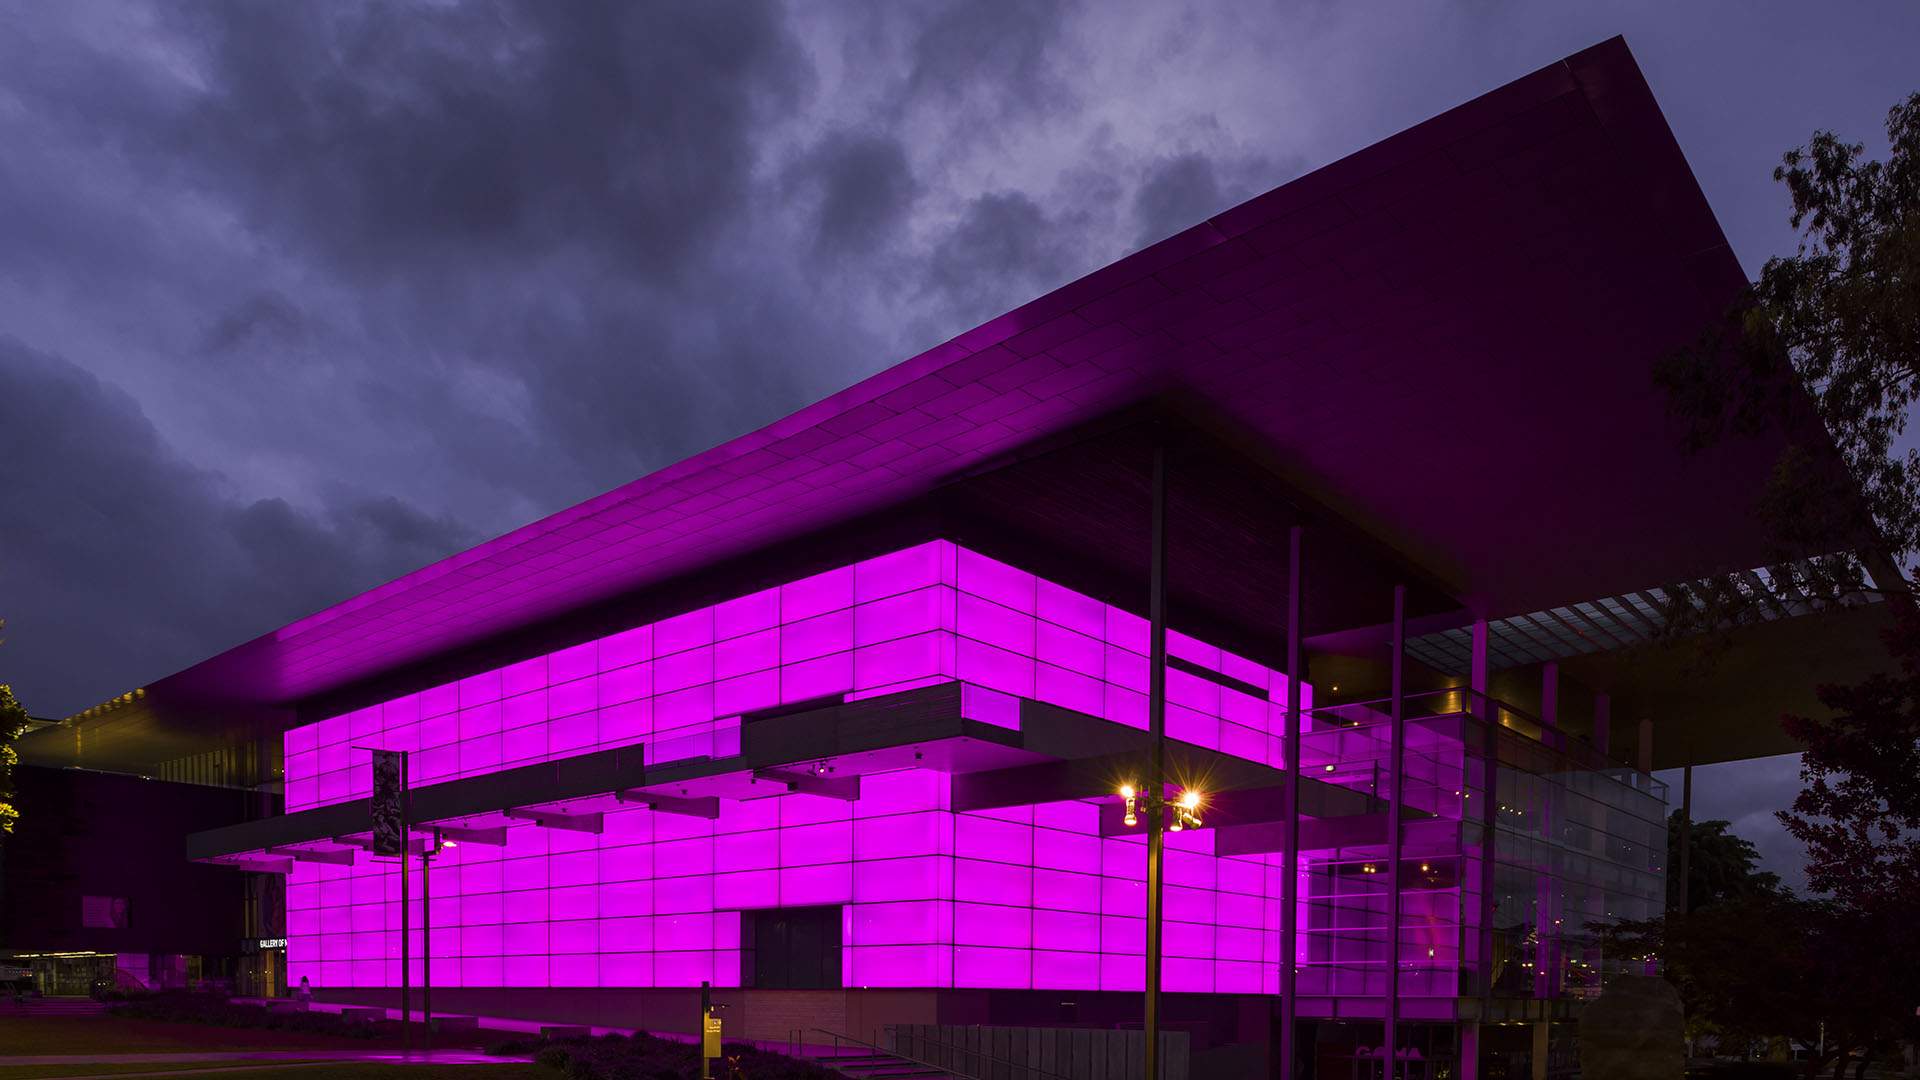 Brisbane's GOMA Is Now Home to a Major New James Turrell Light Installation